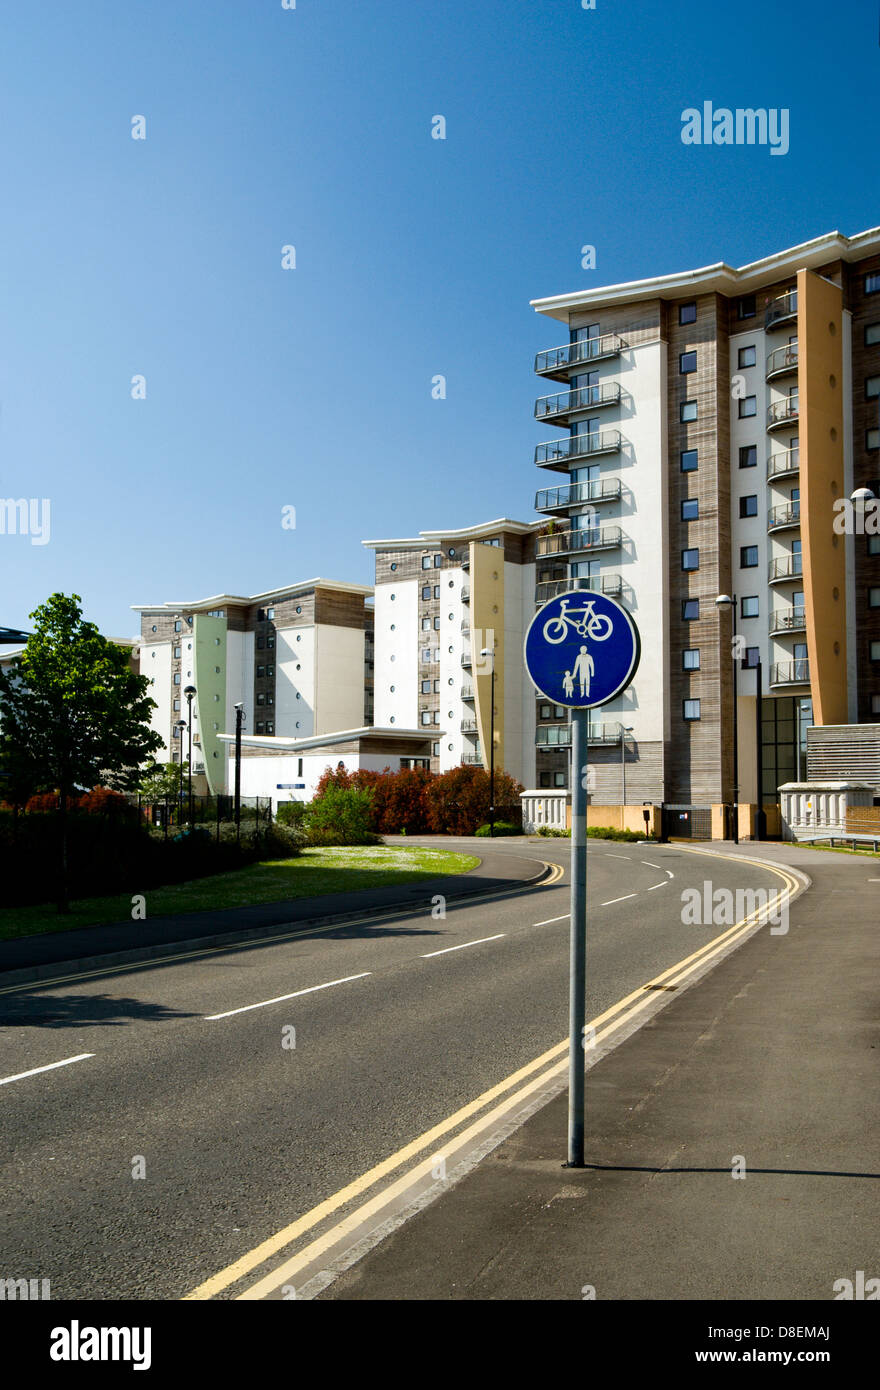 block of flats besides river ely cardiff sports village glamorgan south wales uk Stock Photo